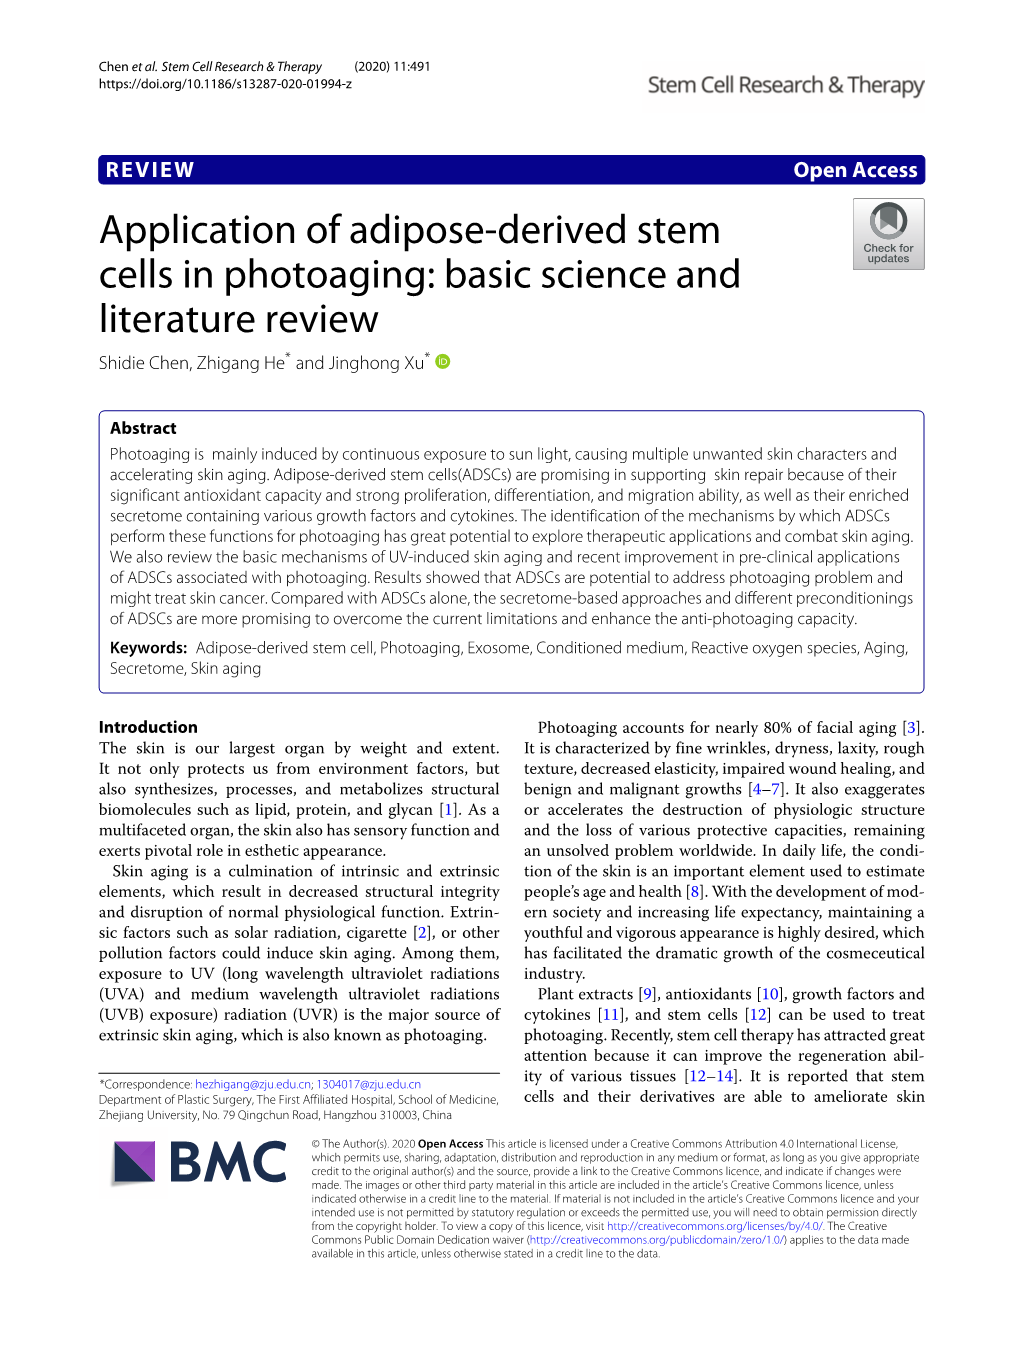 Application of Adipose-Derived Stem Cells in Photoaging: Basic Science and Literature Review Shidie Chen, Zhigang He* and Jinghong Xu*